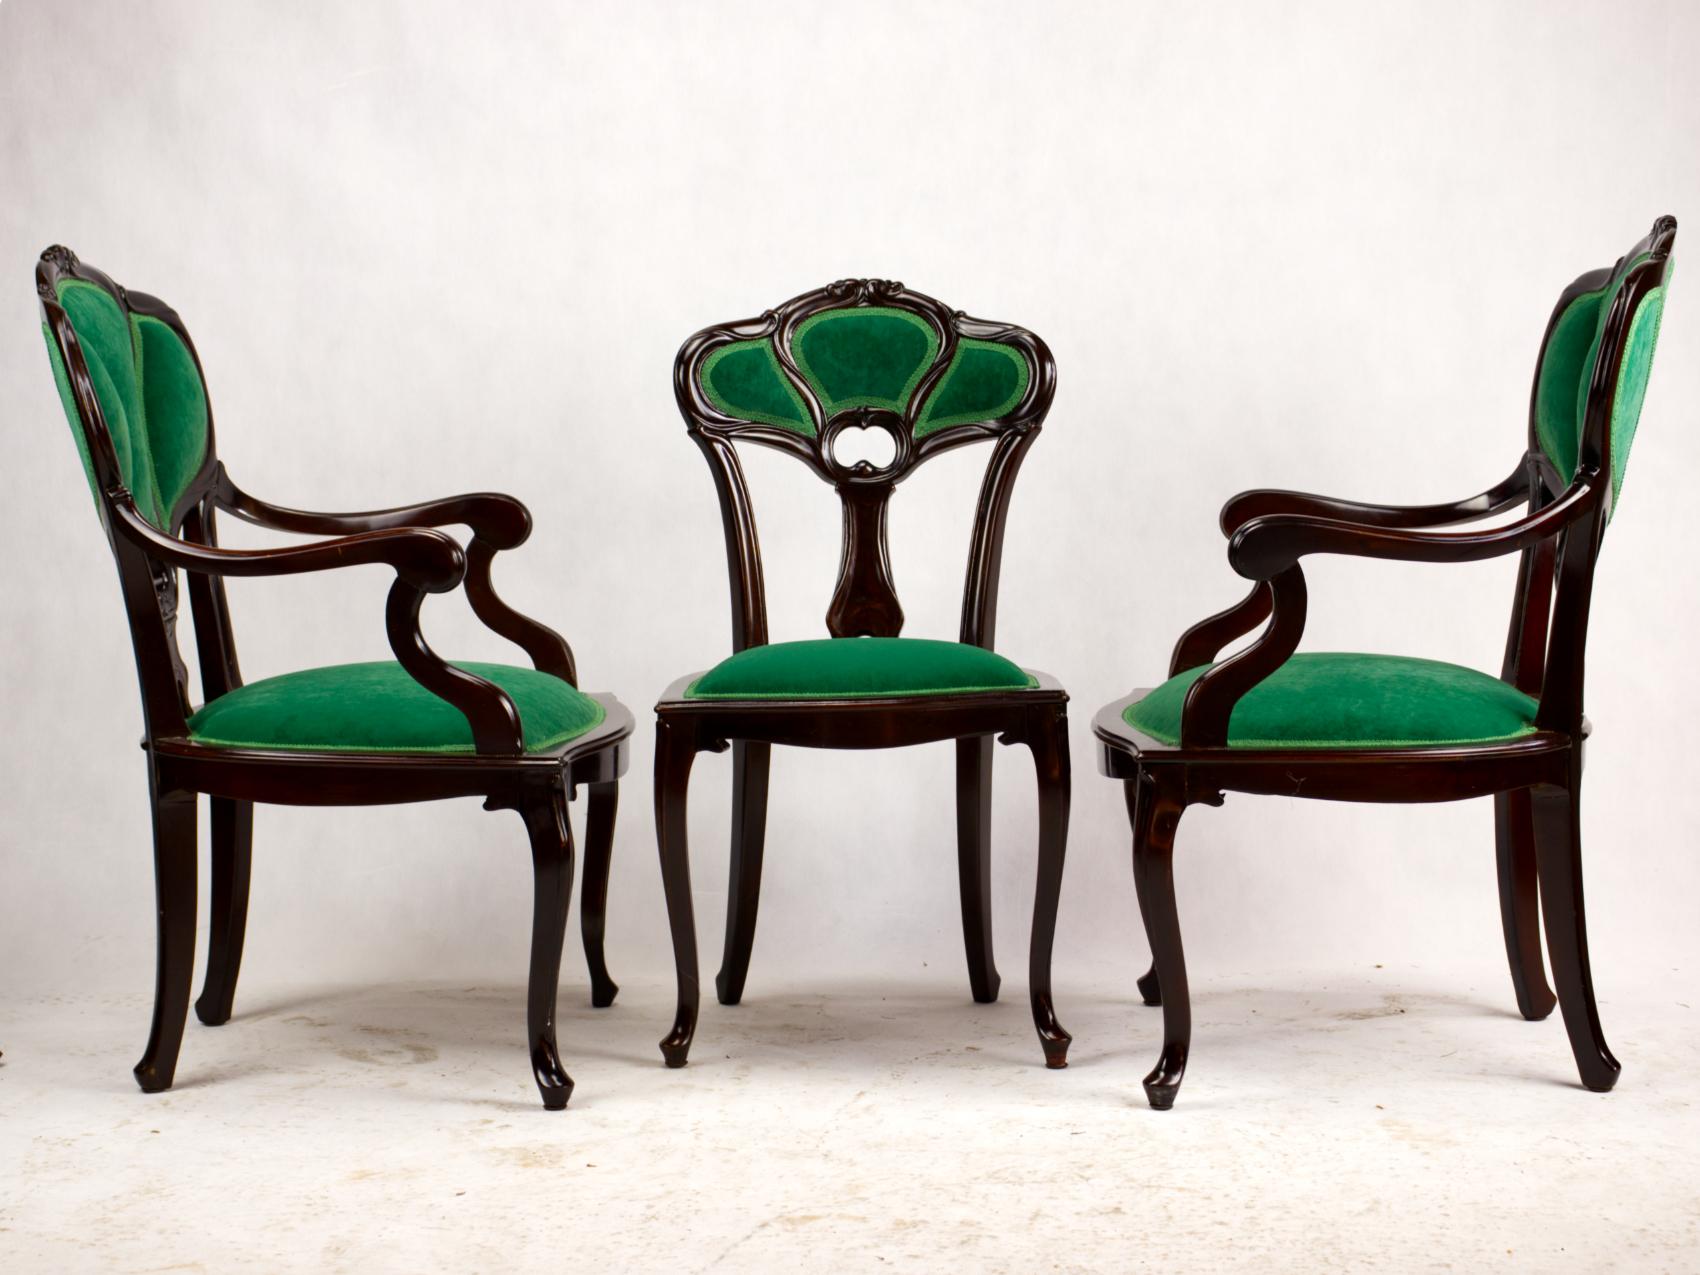 Set of three Art Nouveau early 20th century Art Nouveau armchairs. Beautifully carved chair frame made of fruitwood with upholstered seats and backrests upholstered in the shape of three leaves on cabriole legs. The chairs are completely renovated